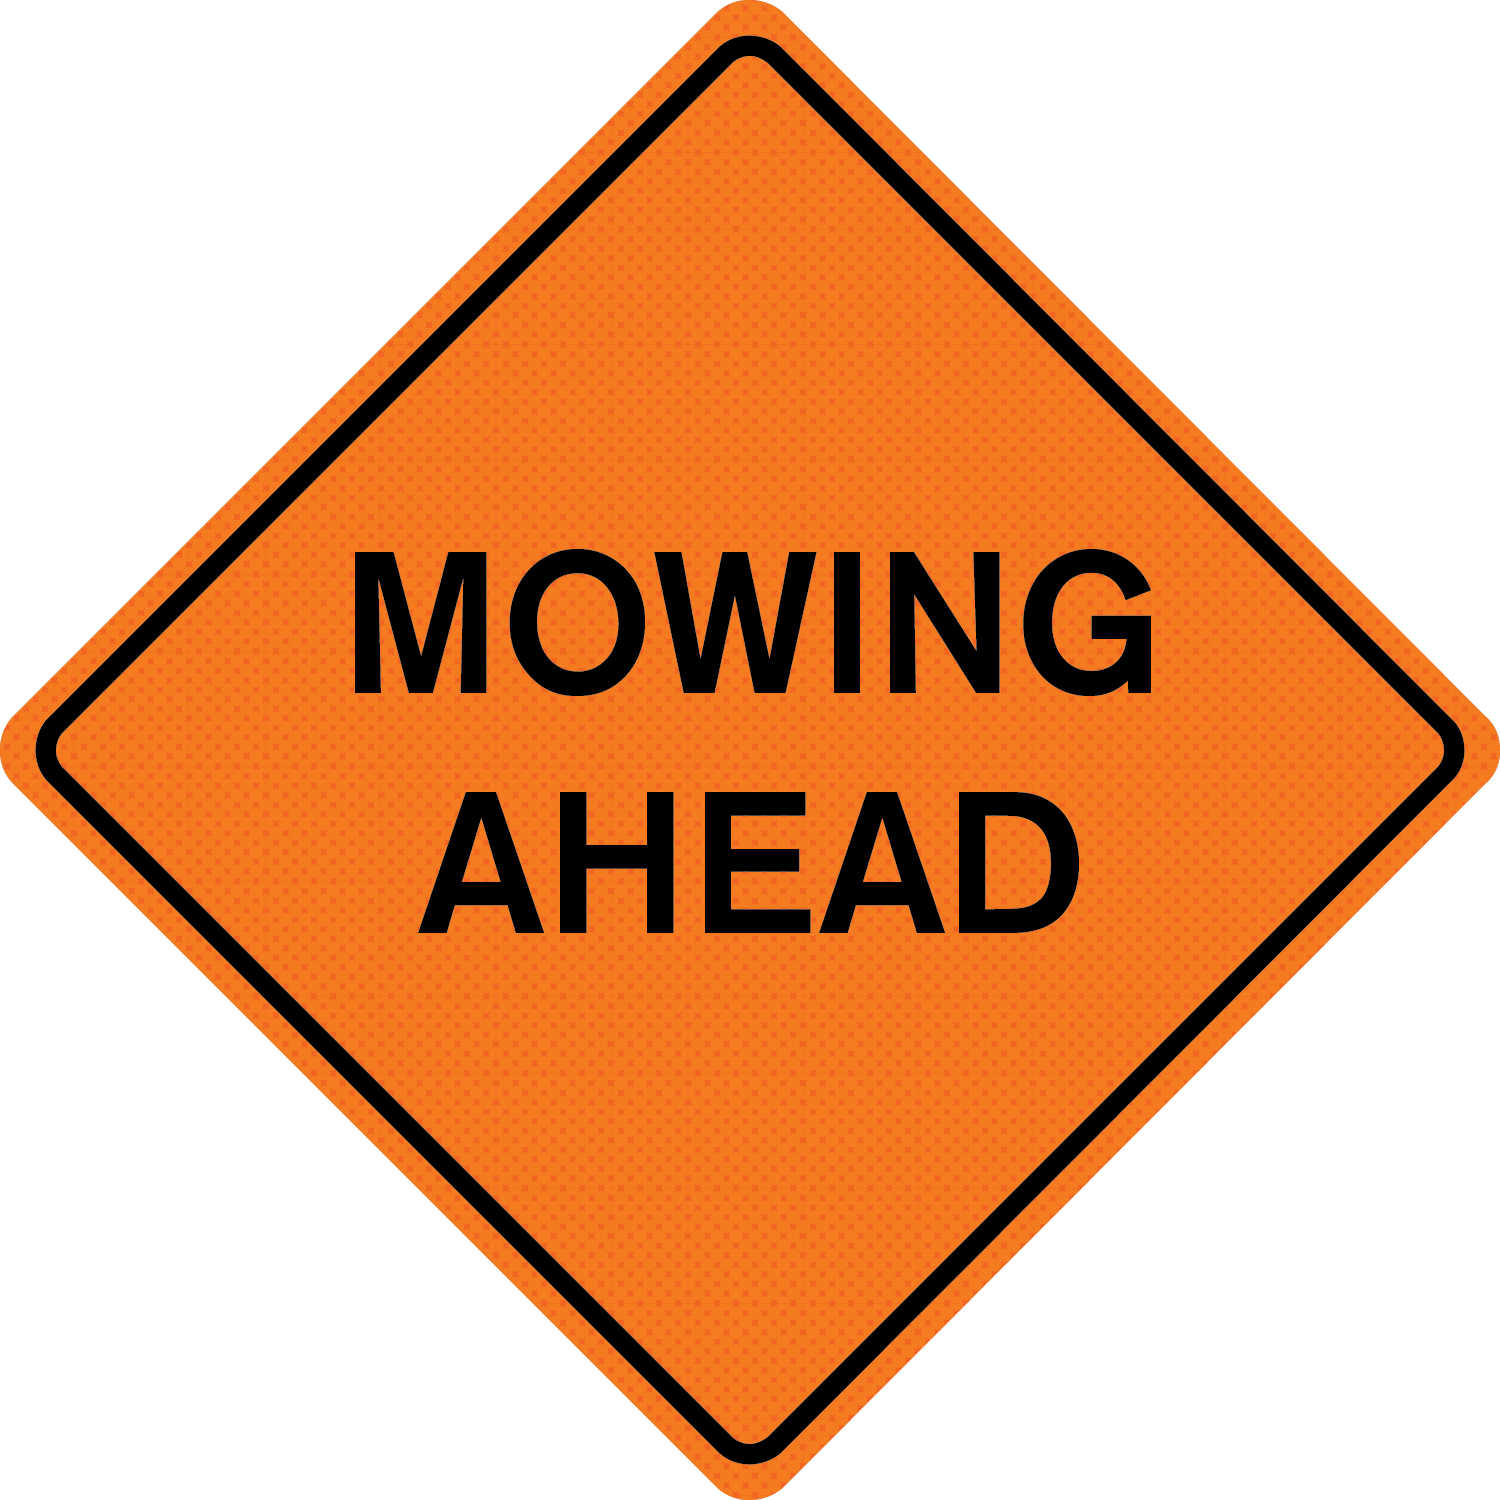 36" x 36" Solid Sign “MOWING AHEAD” 